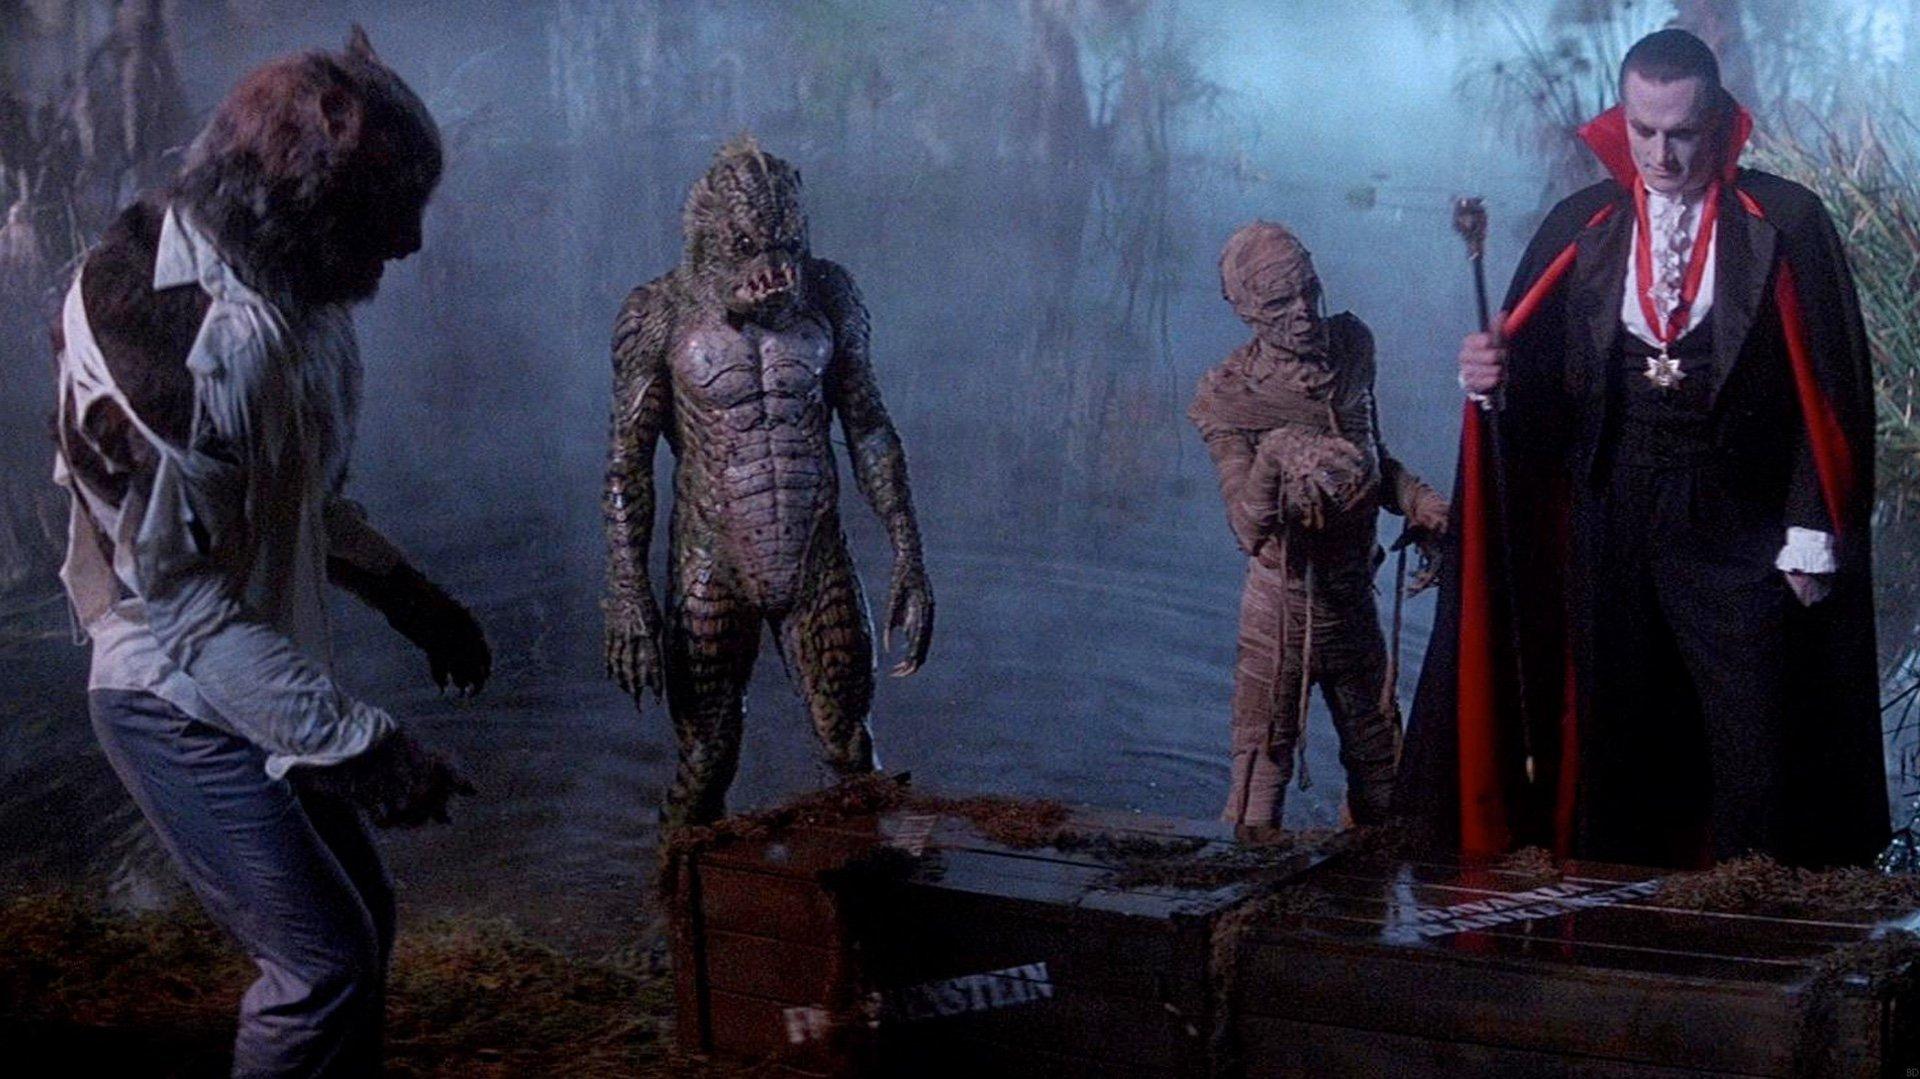 The Monster Squad Behind Scenes Look At Creation Of